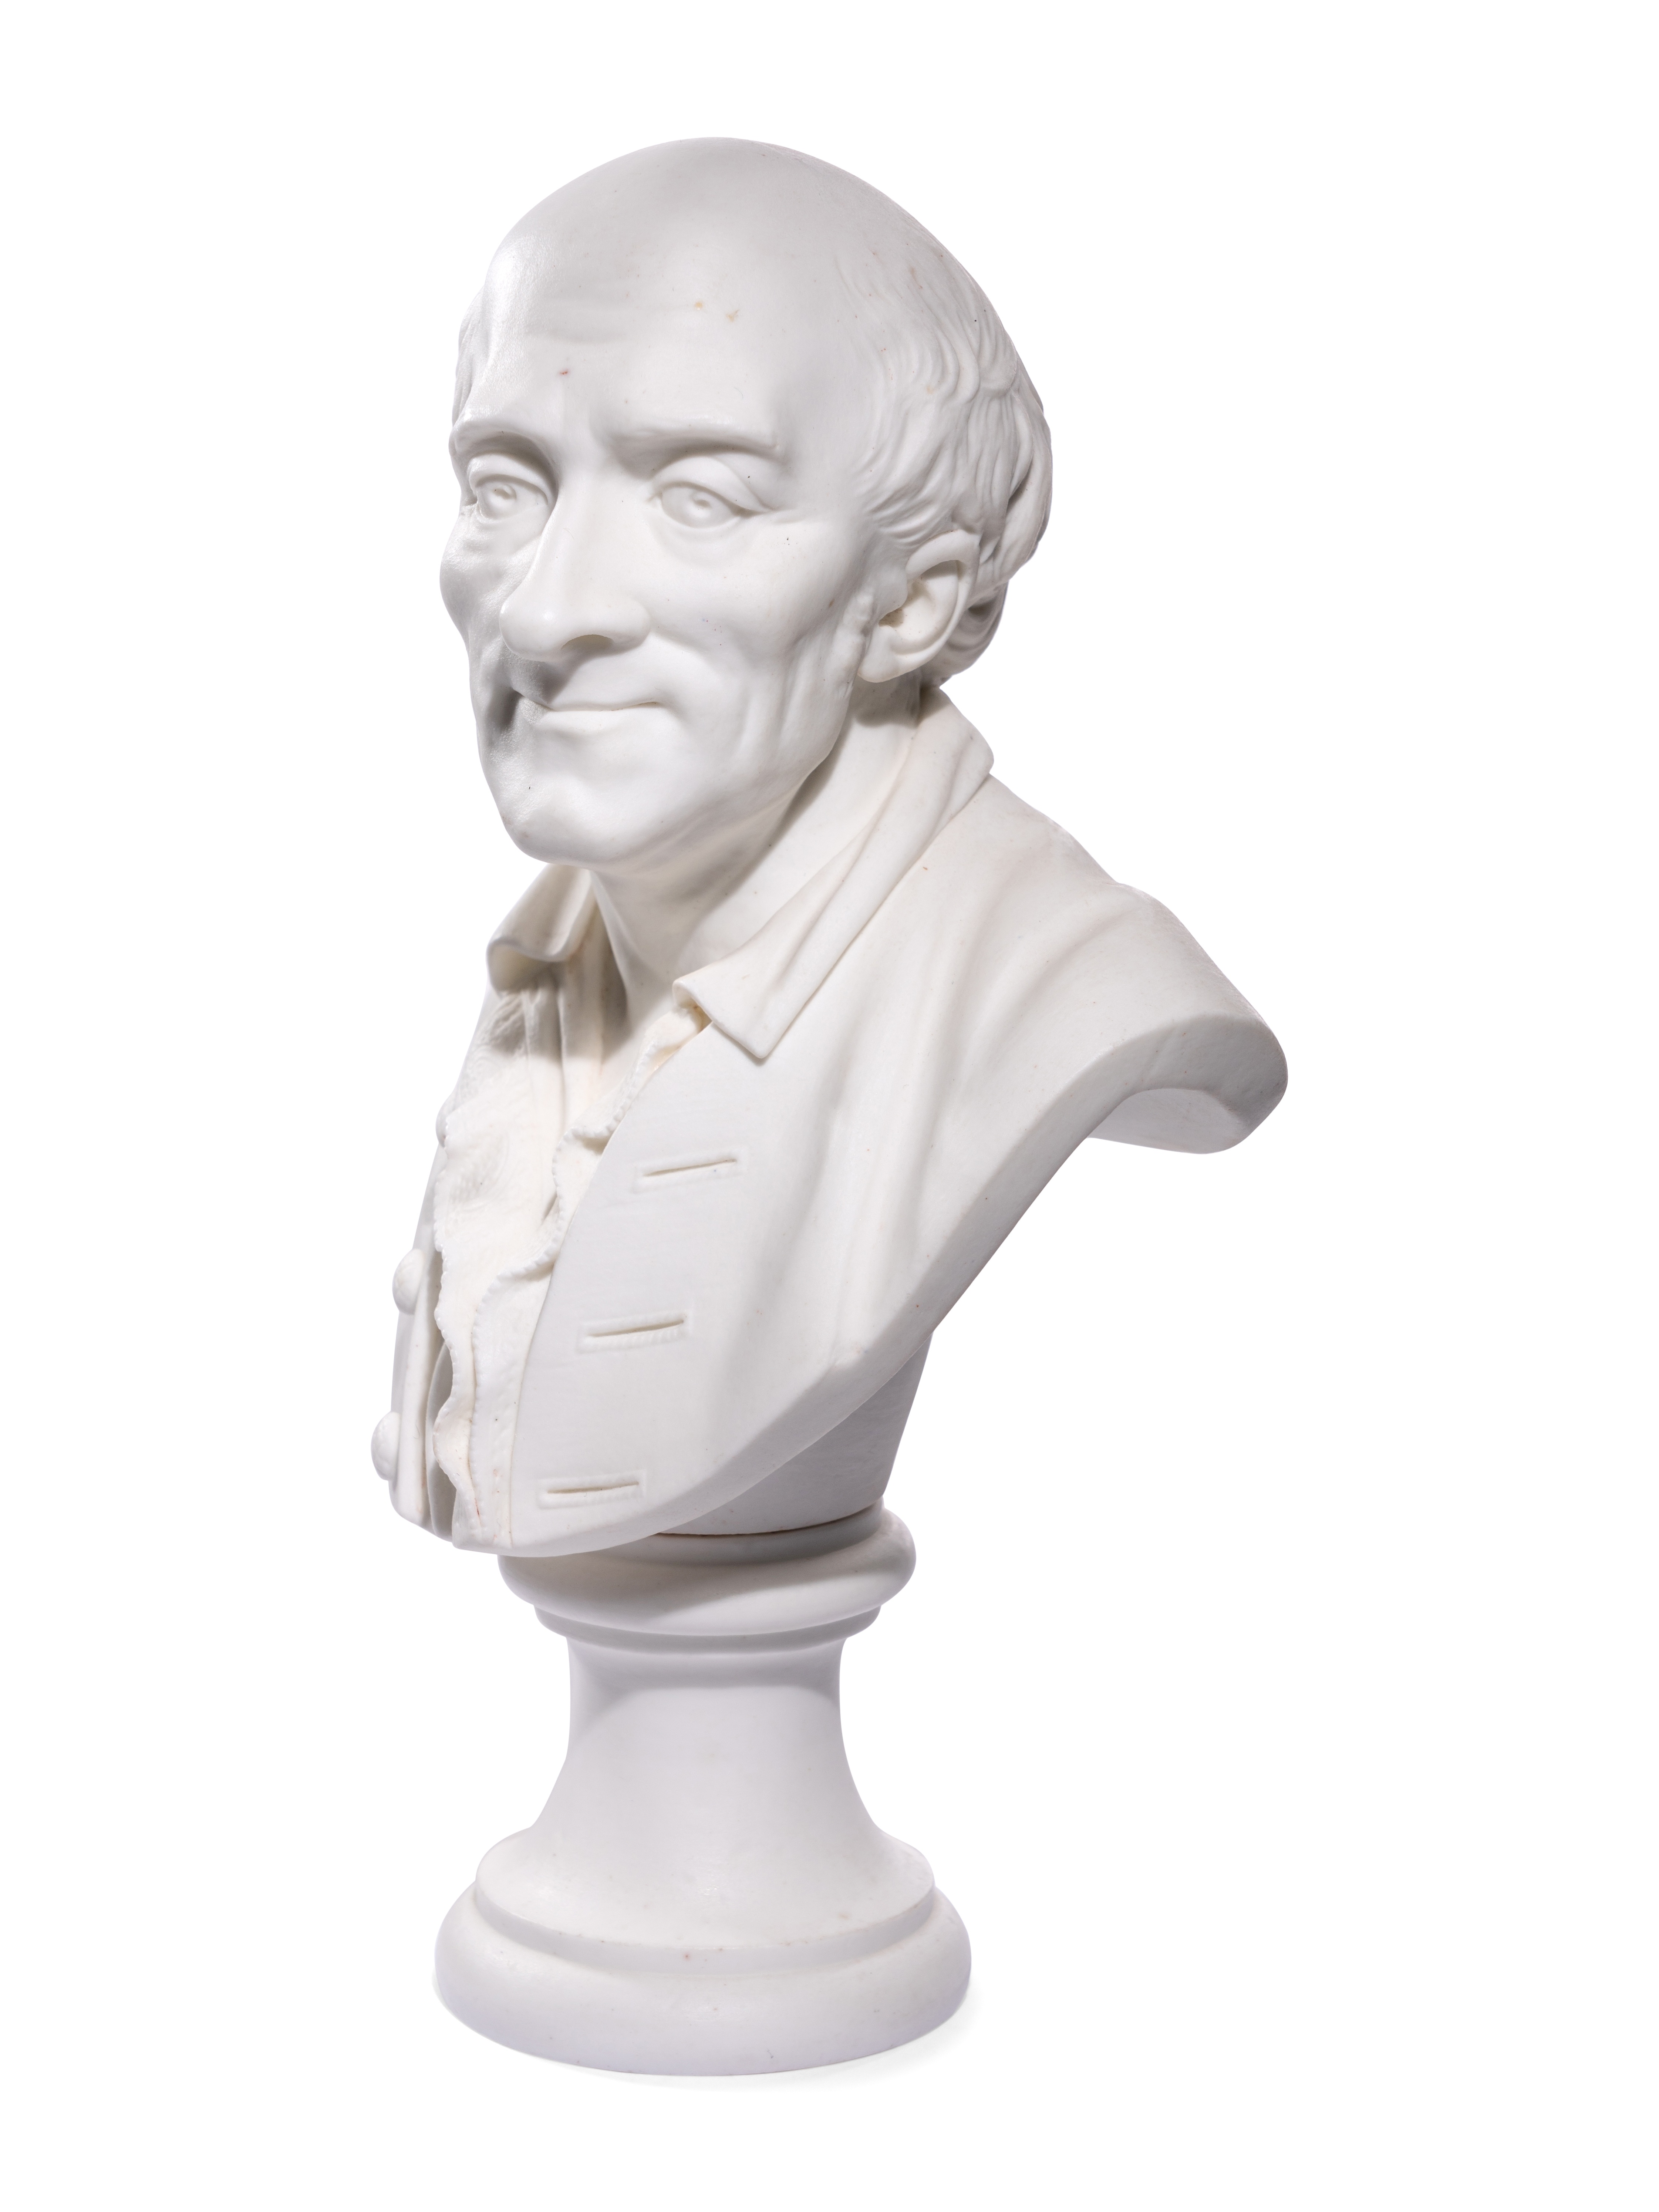 A French Biscuit Porcelain Bust of Fran'cois-Marie Arouet, Called Voltaire - Image 5 of 20